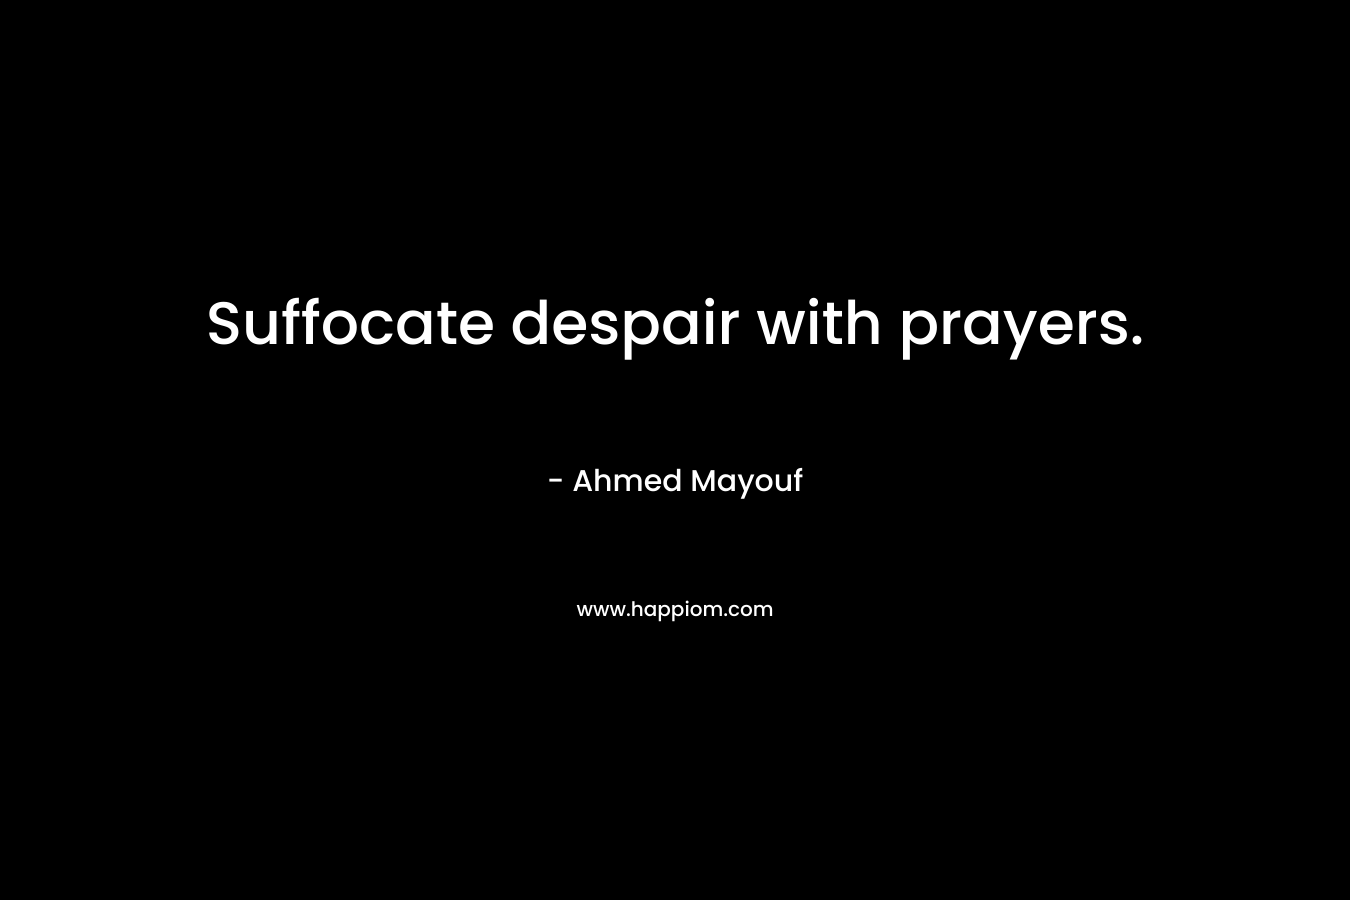 Suffocate despair with prayers. – Ahmed Mayouf